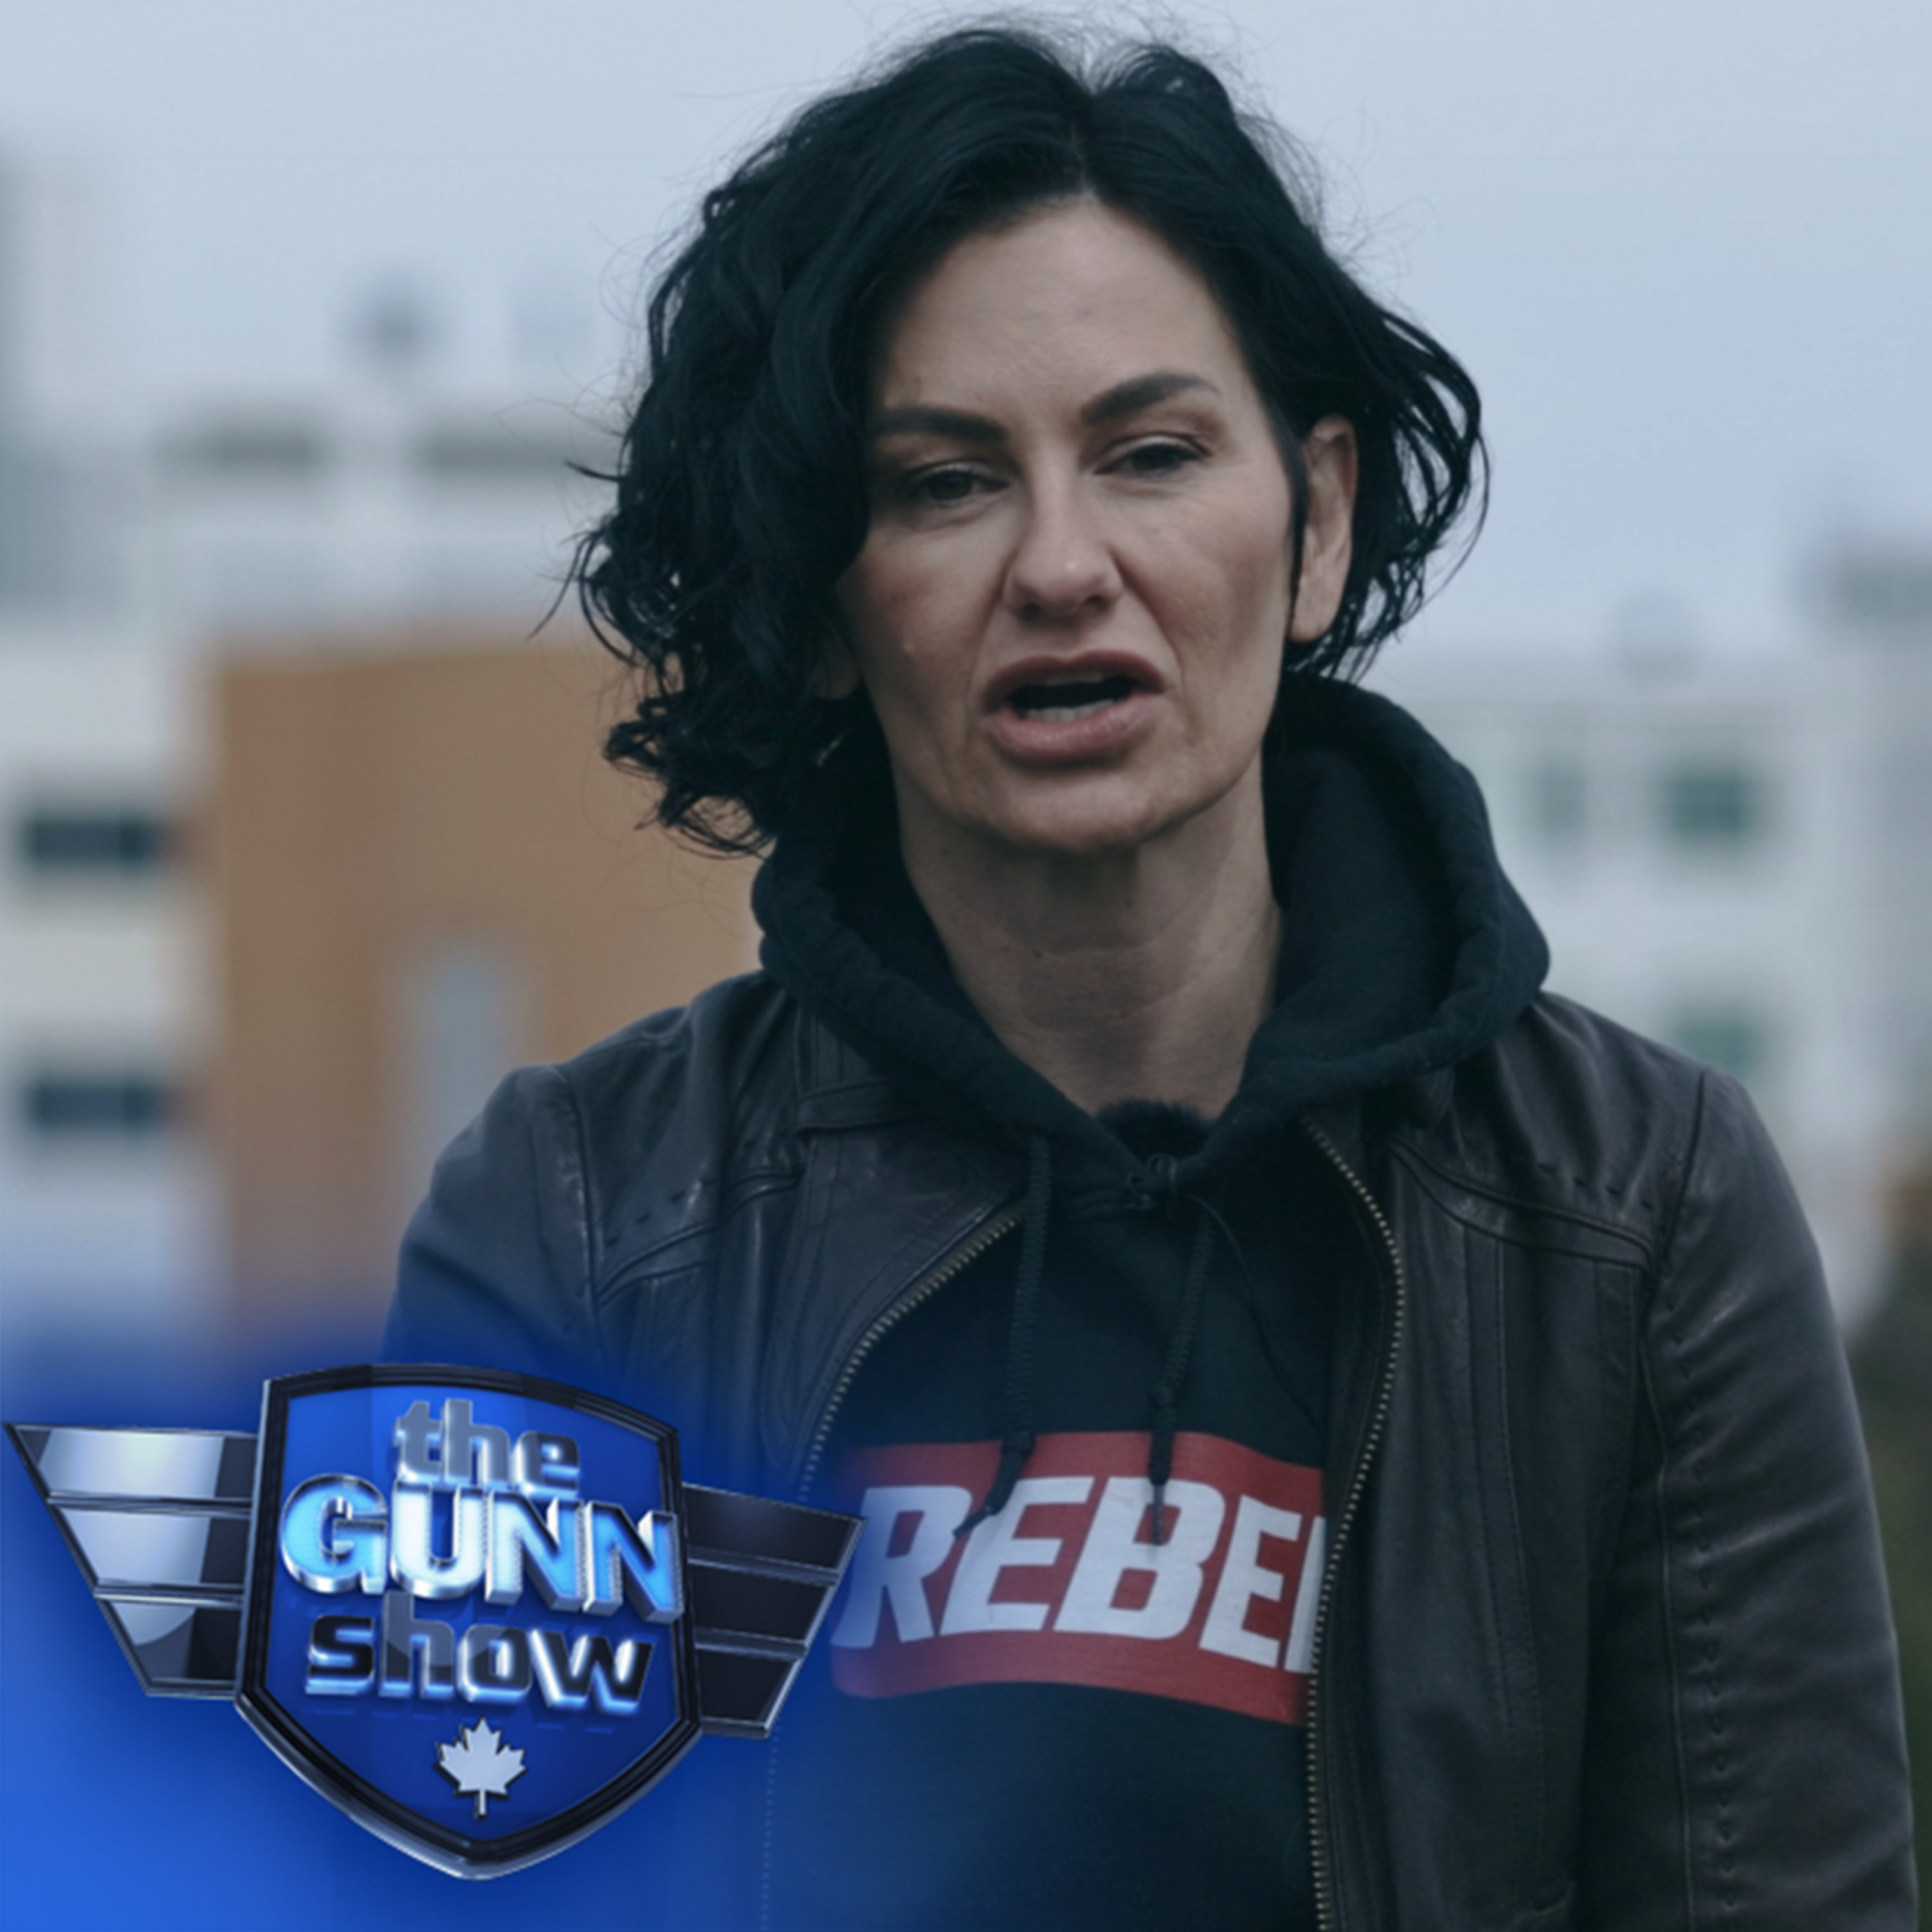 SHEILA GUNN REID | Rebel News responds to viewer comments, hate mail on latest documentary